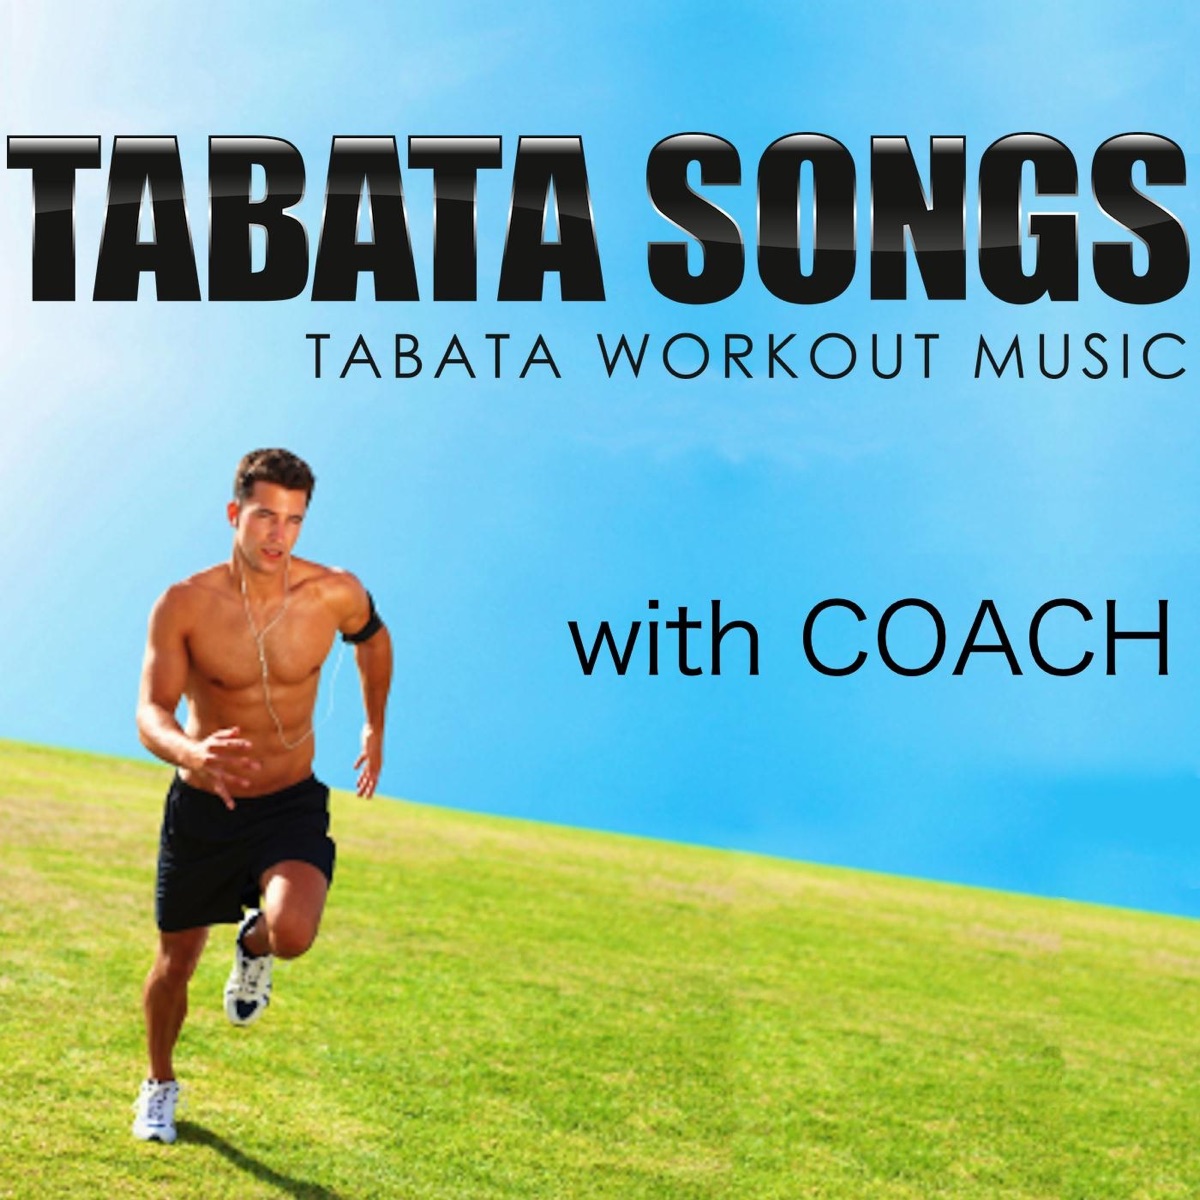 Tabata Workout Music With Coach - Album by Tabata Songs - Apple Music